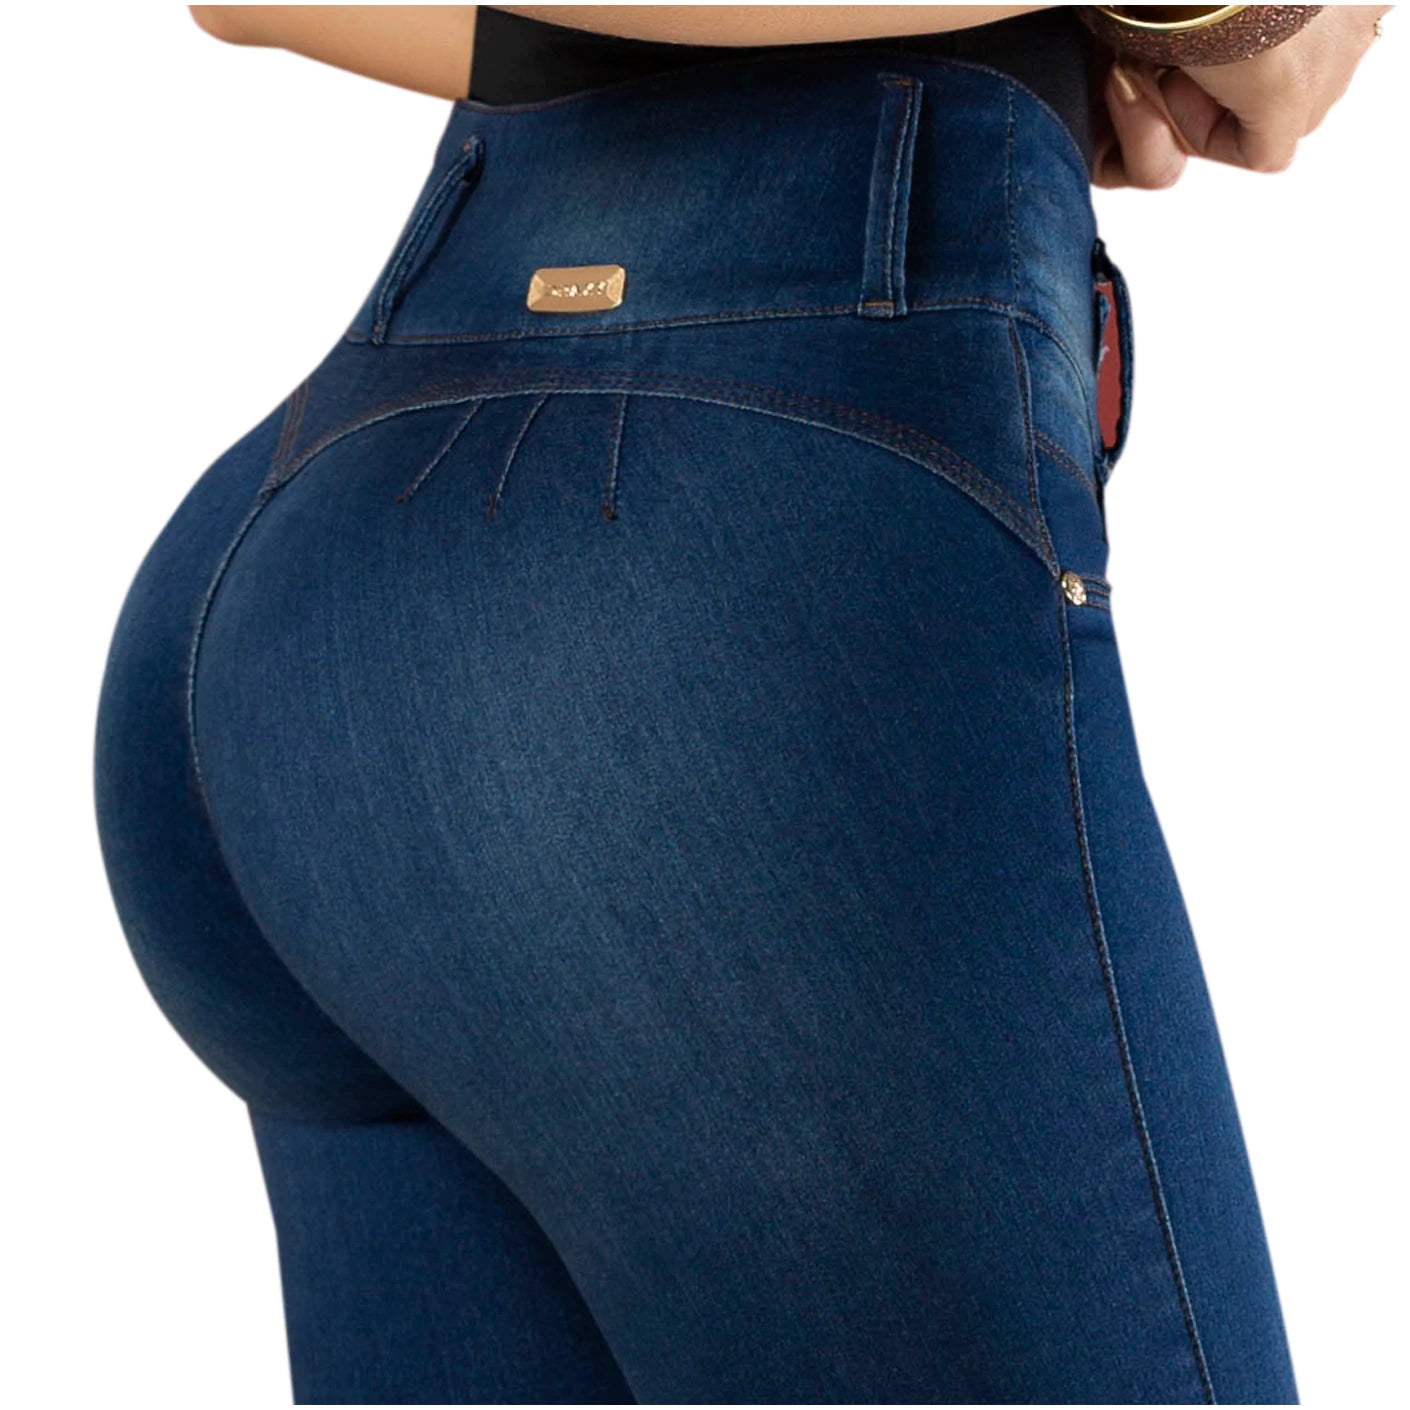 Colombian Butt lifting Jeans